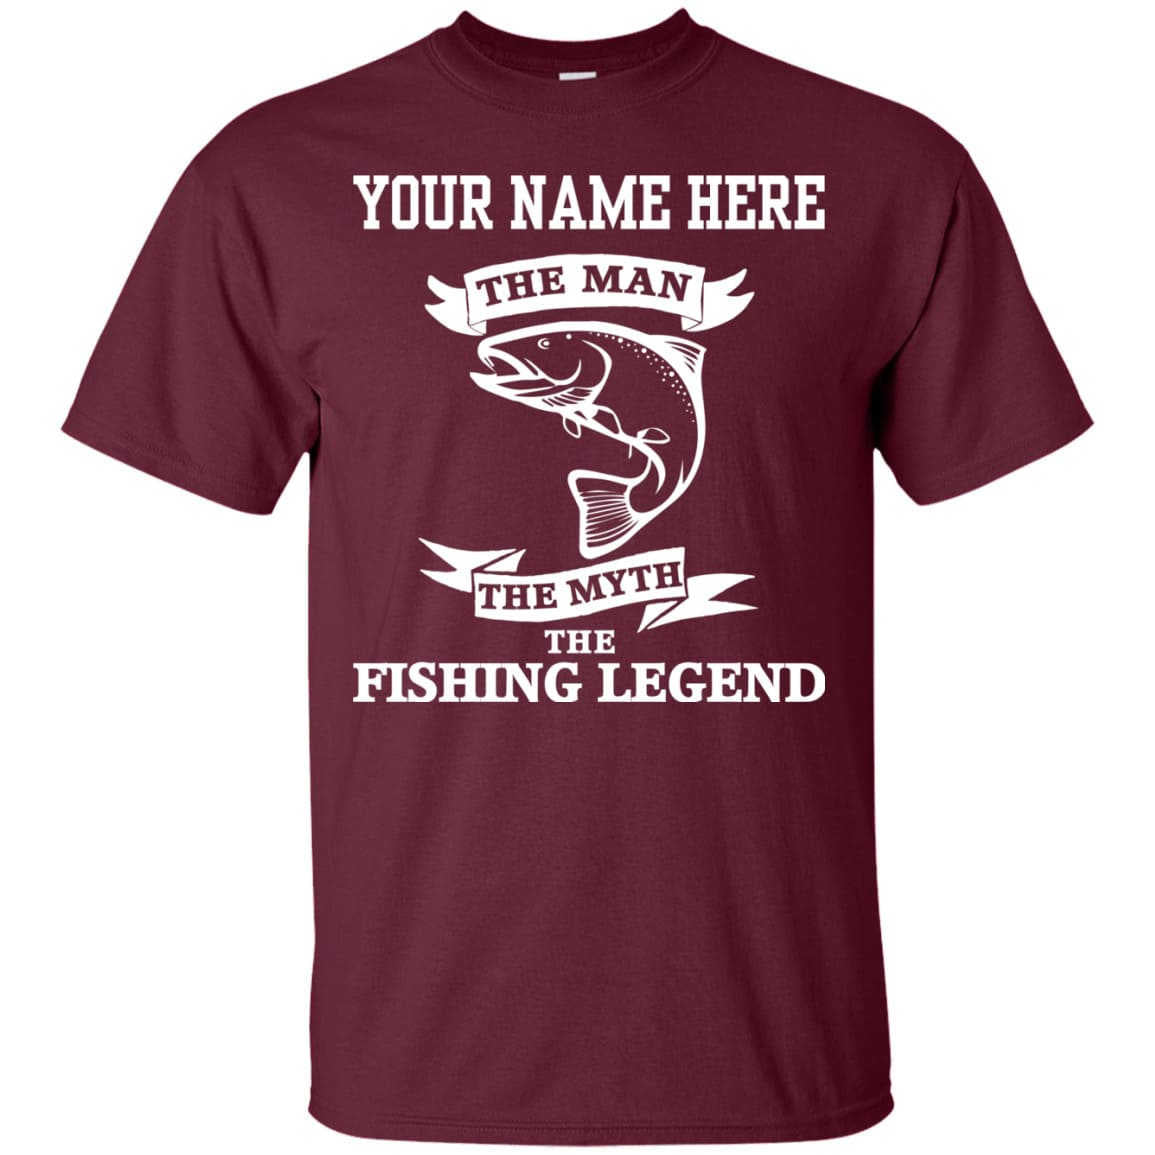 Personalized the man the myth the legend t-shirt a maroon